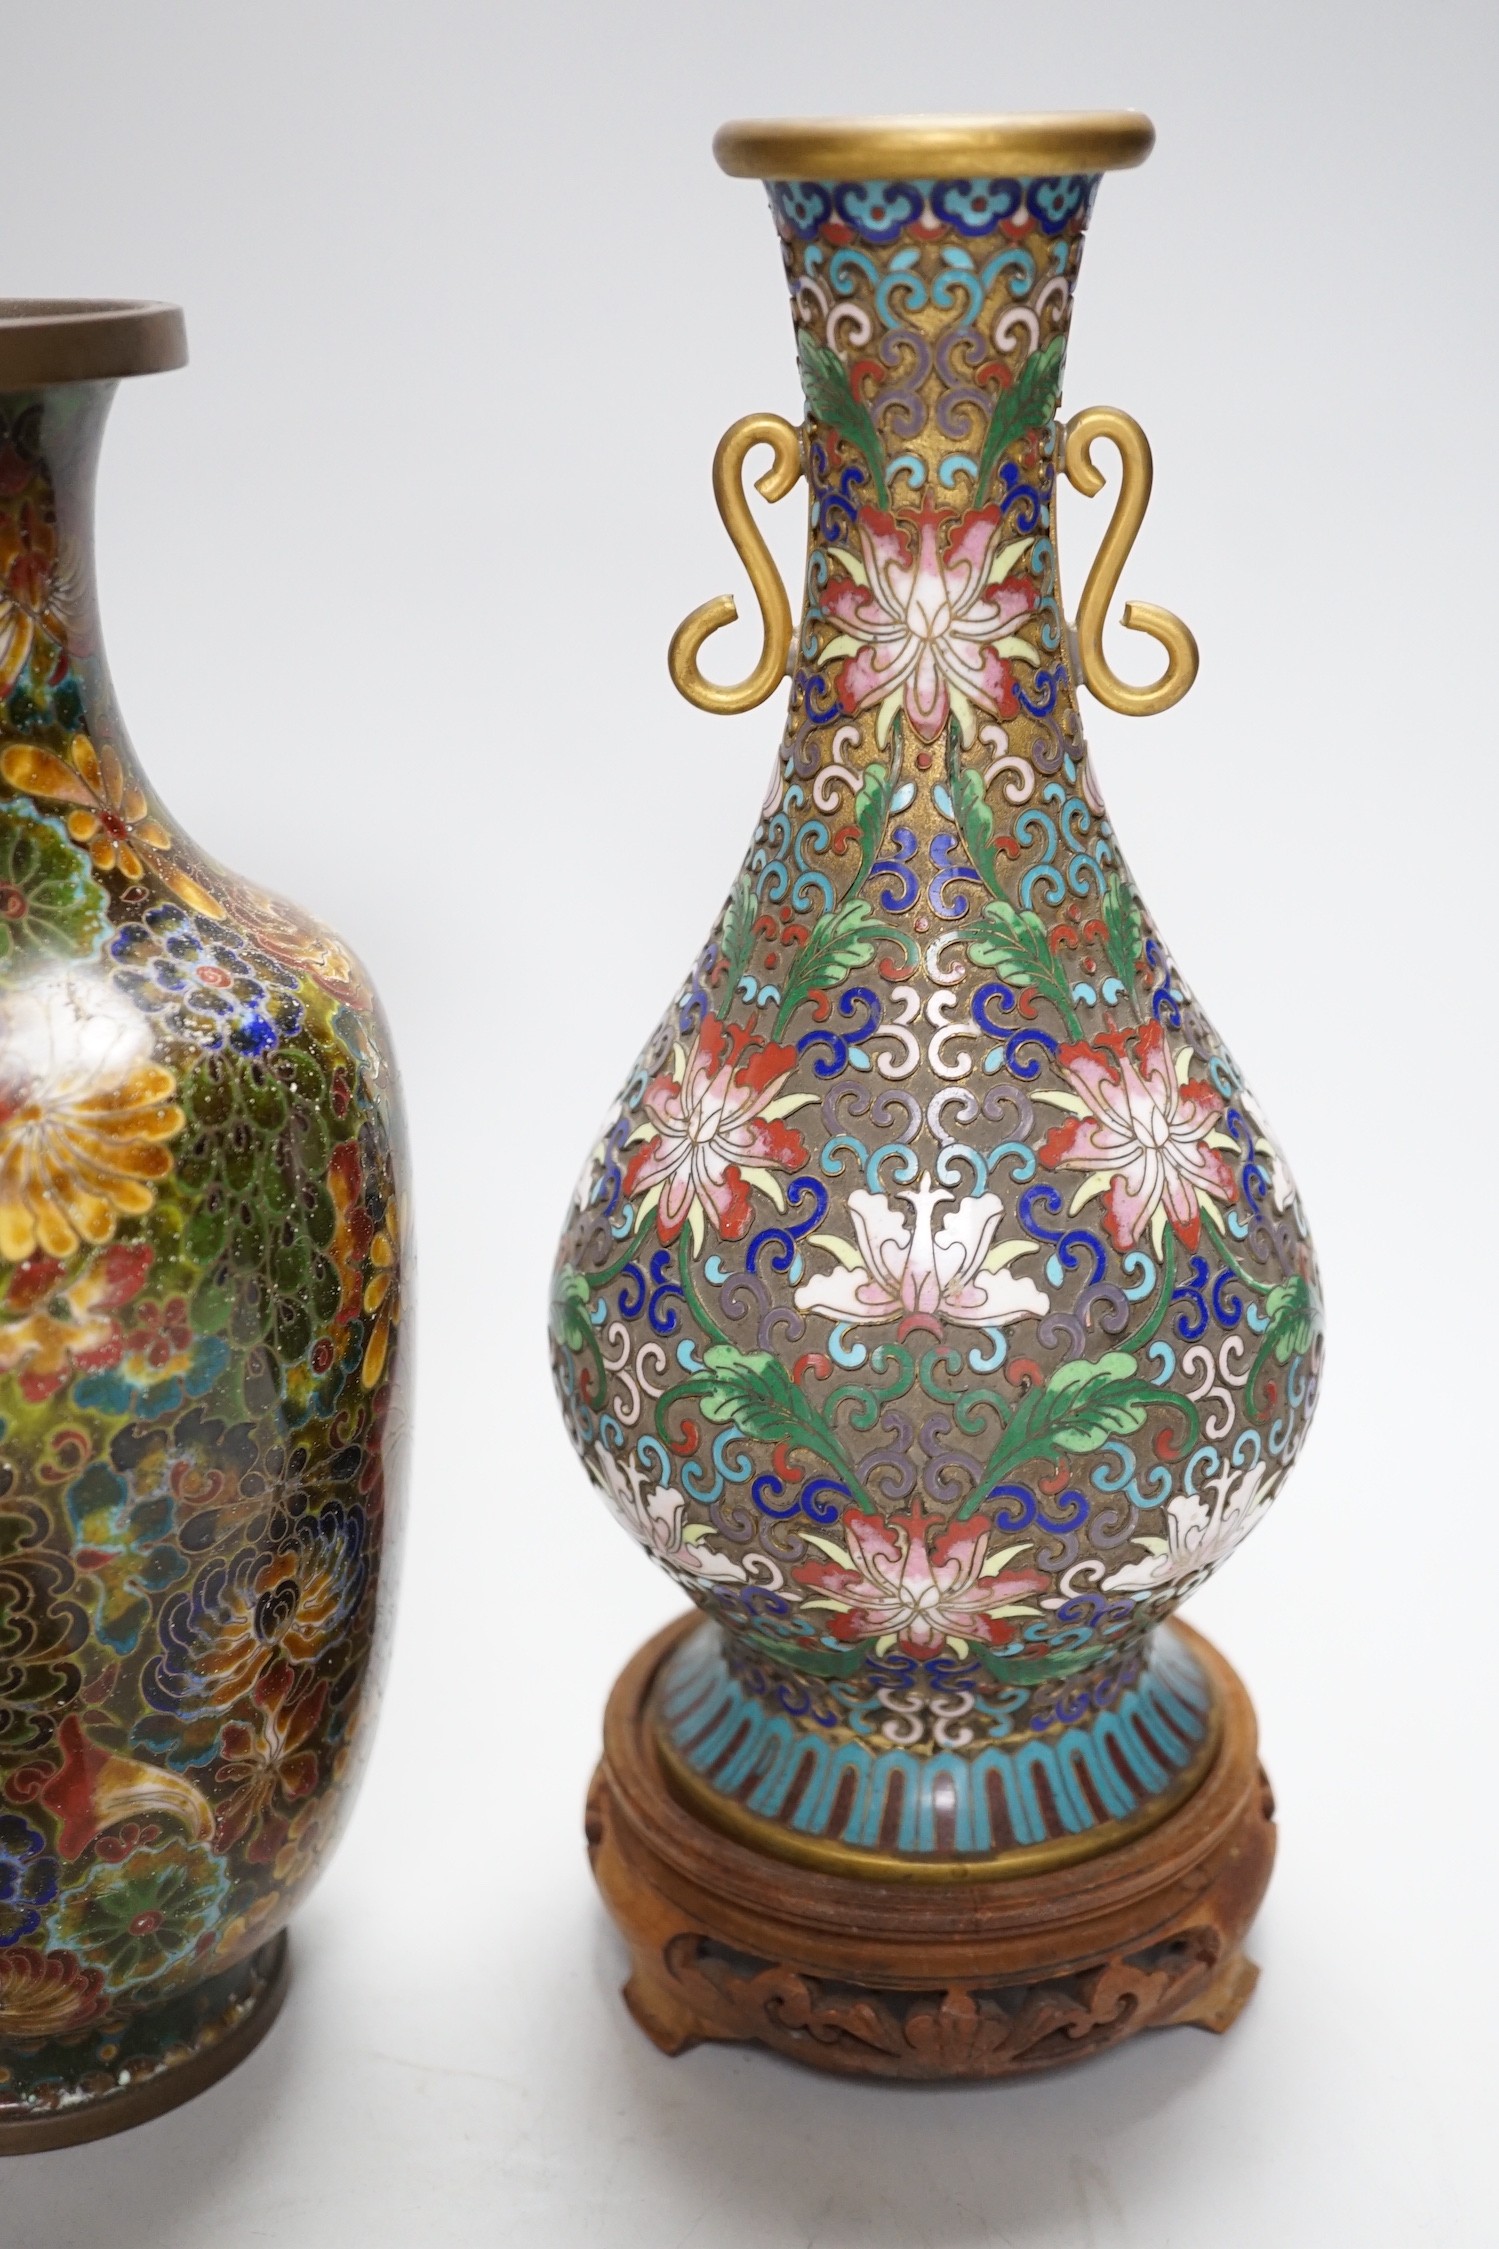 A pair of Chinese cloisonné enamel vases, another vase and a box